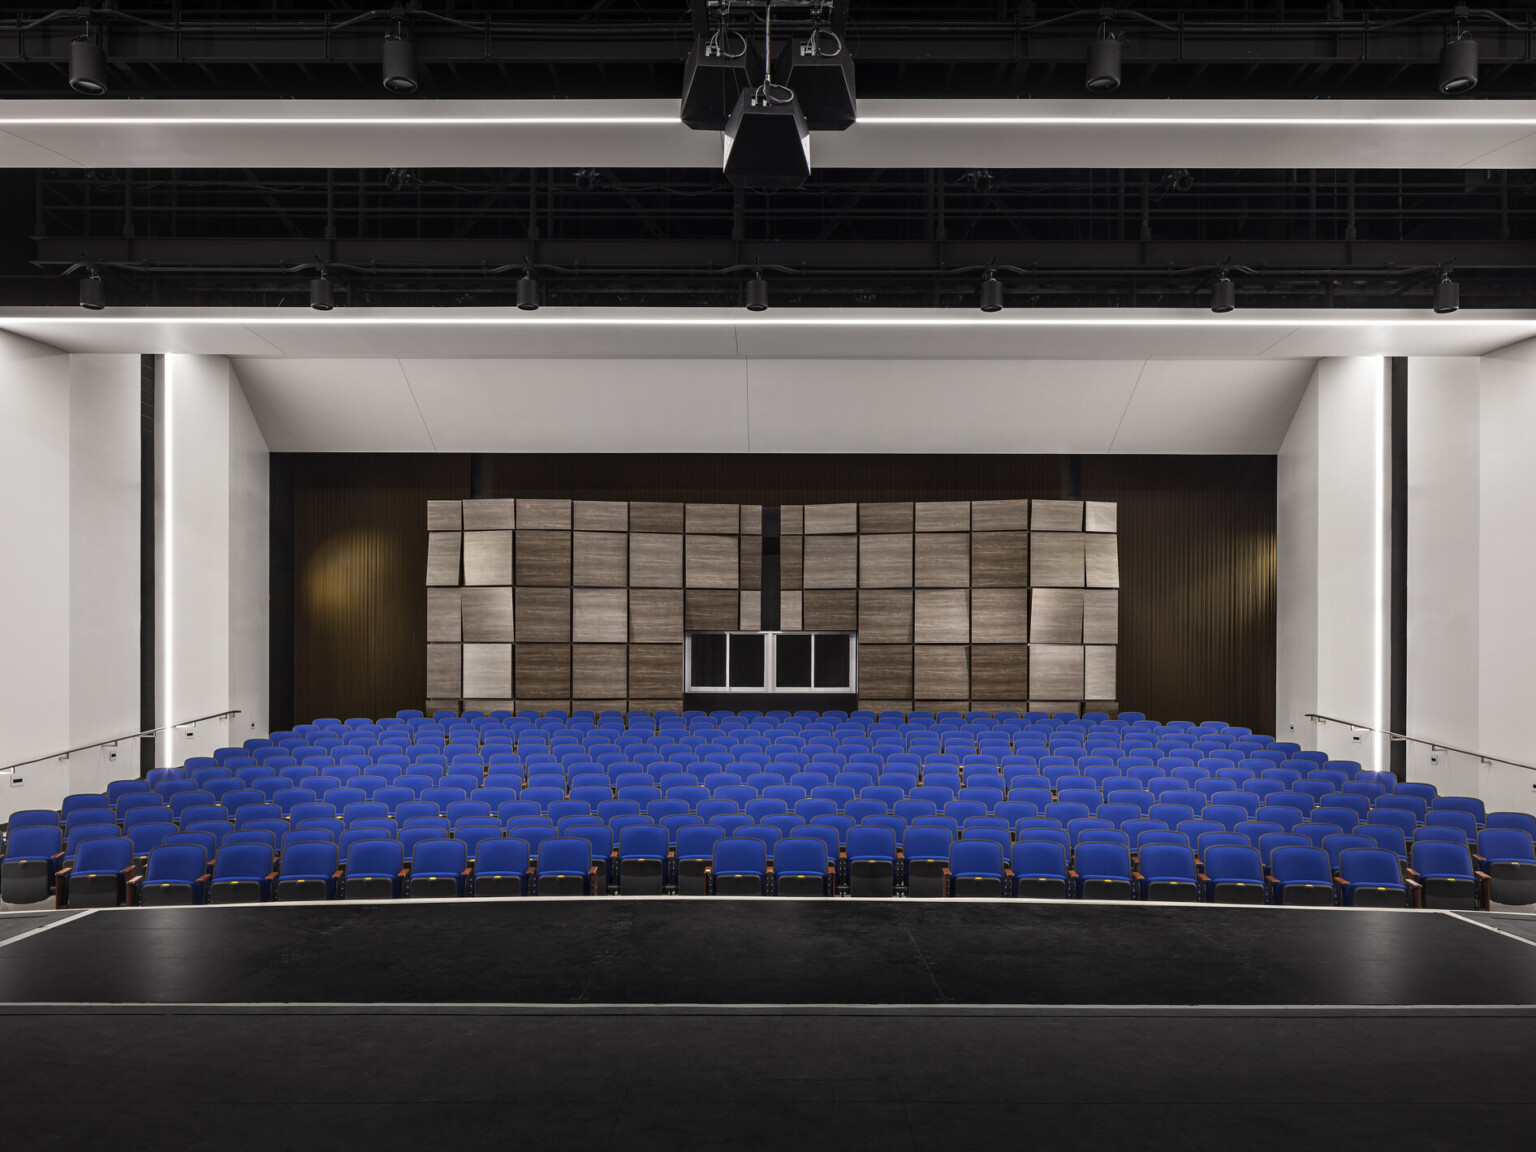 View from stage looking towards audience chamber with blue eats and white walls, textured acoustical panels on back wall